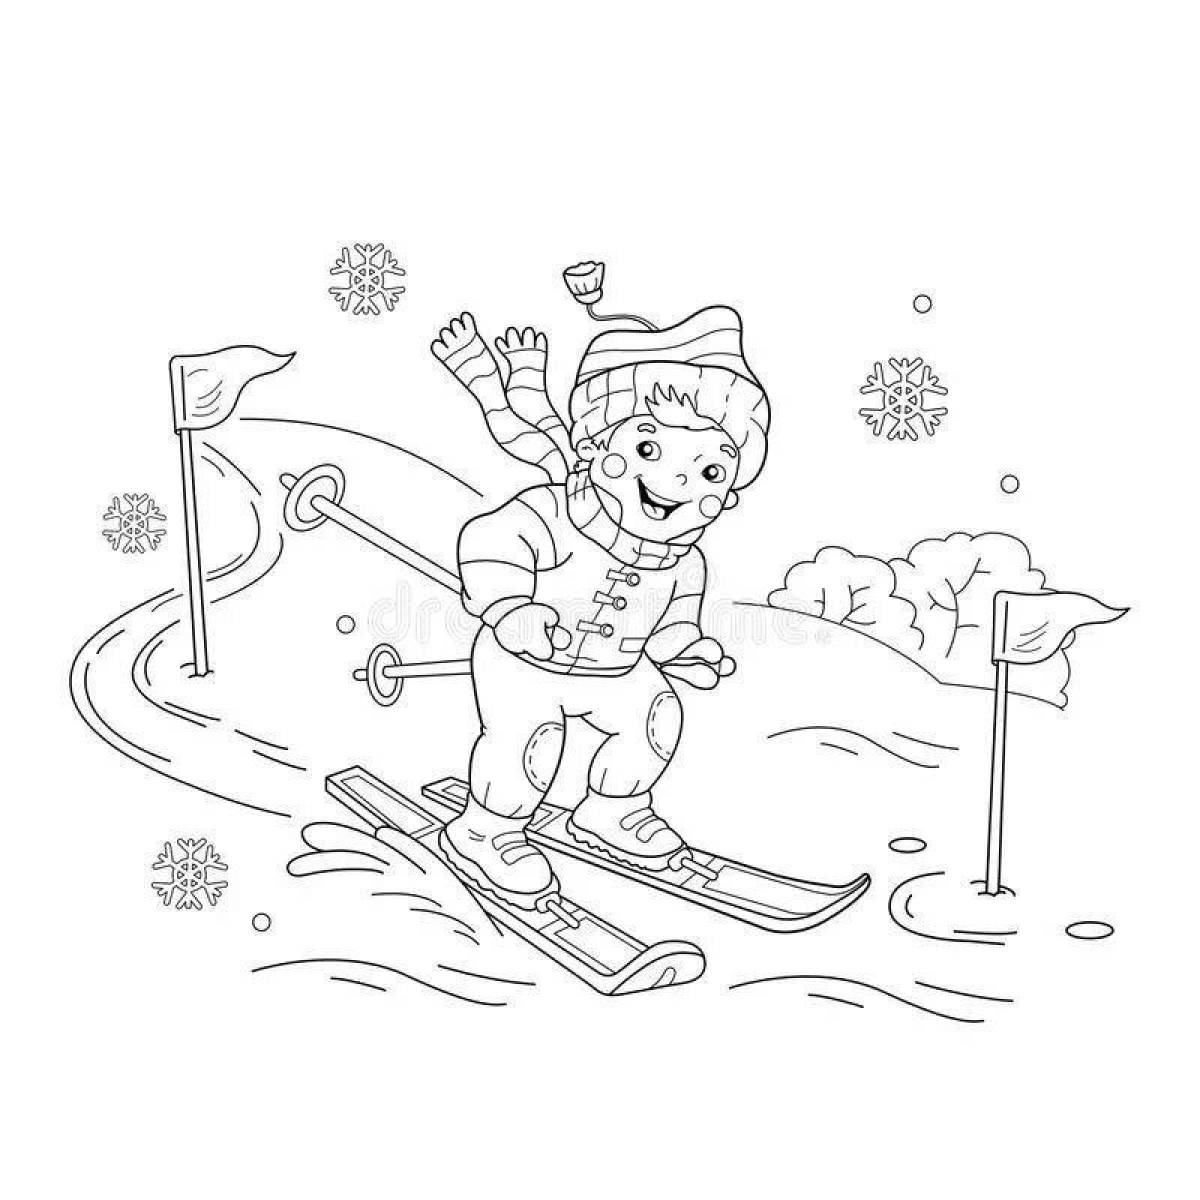 Sweet winter sports coloring pages for kids